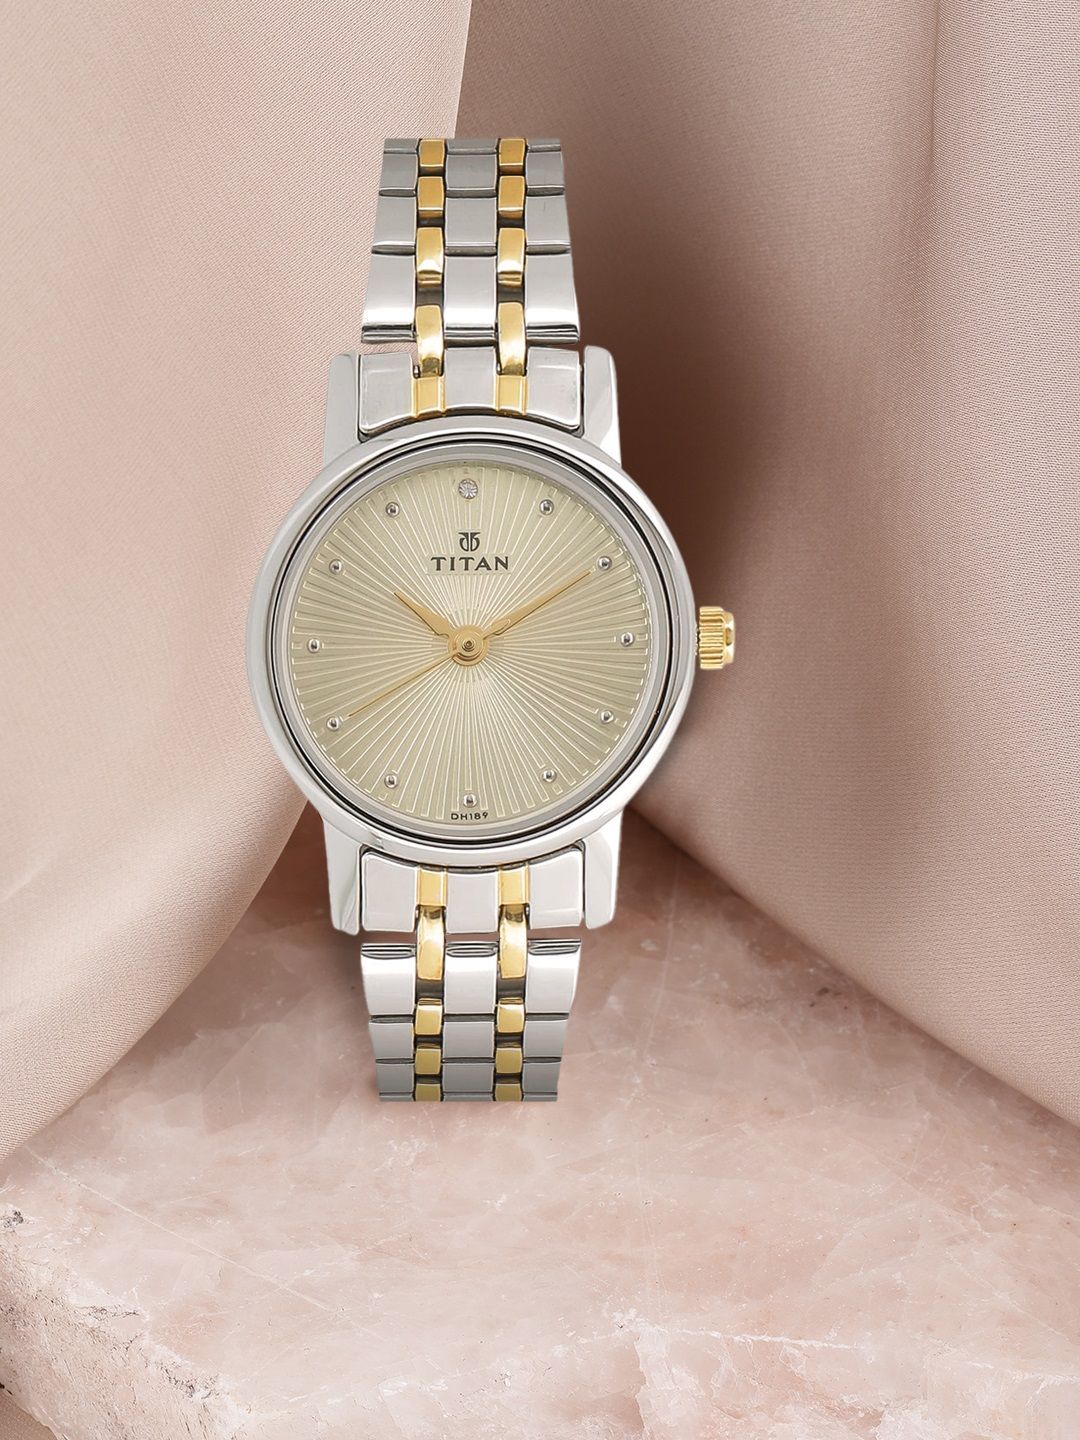 Titan Women Gold-Toned & Silver-Toned Analogue Watch Price in India